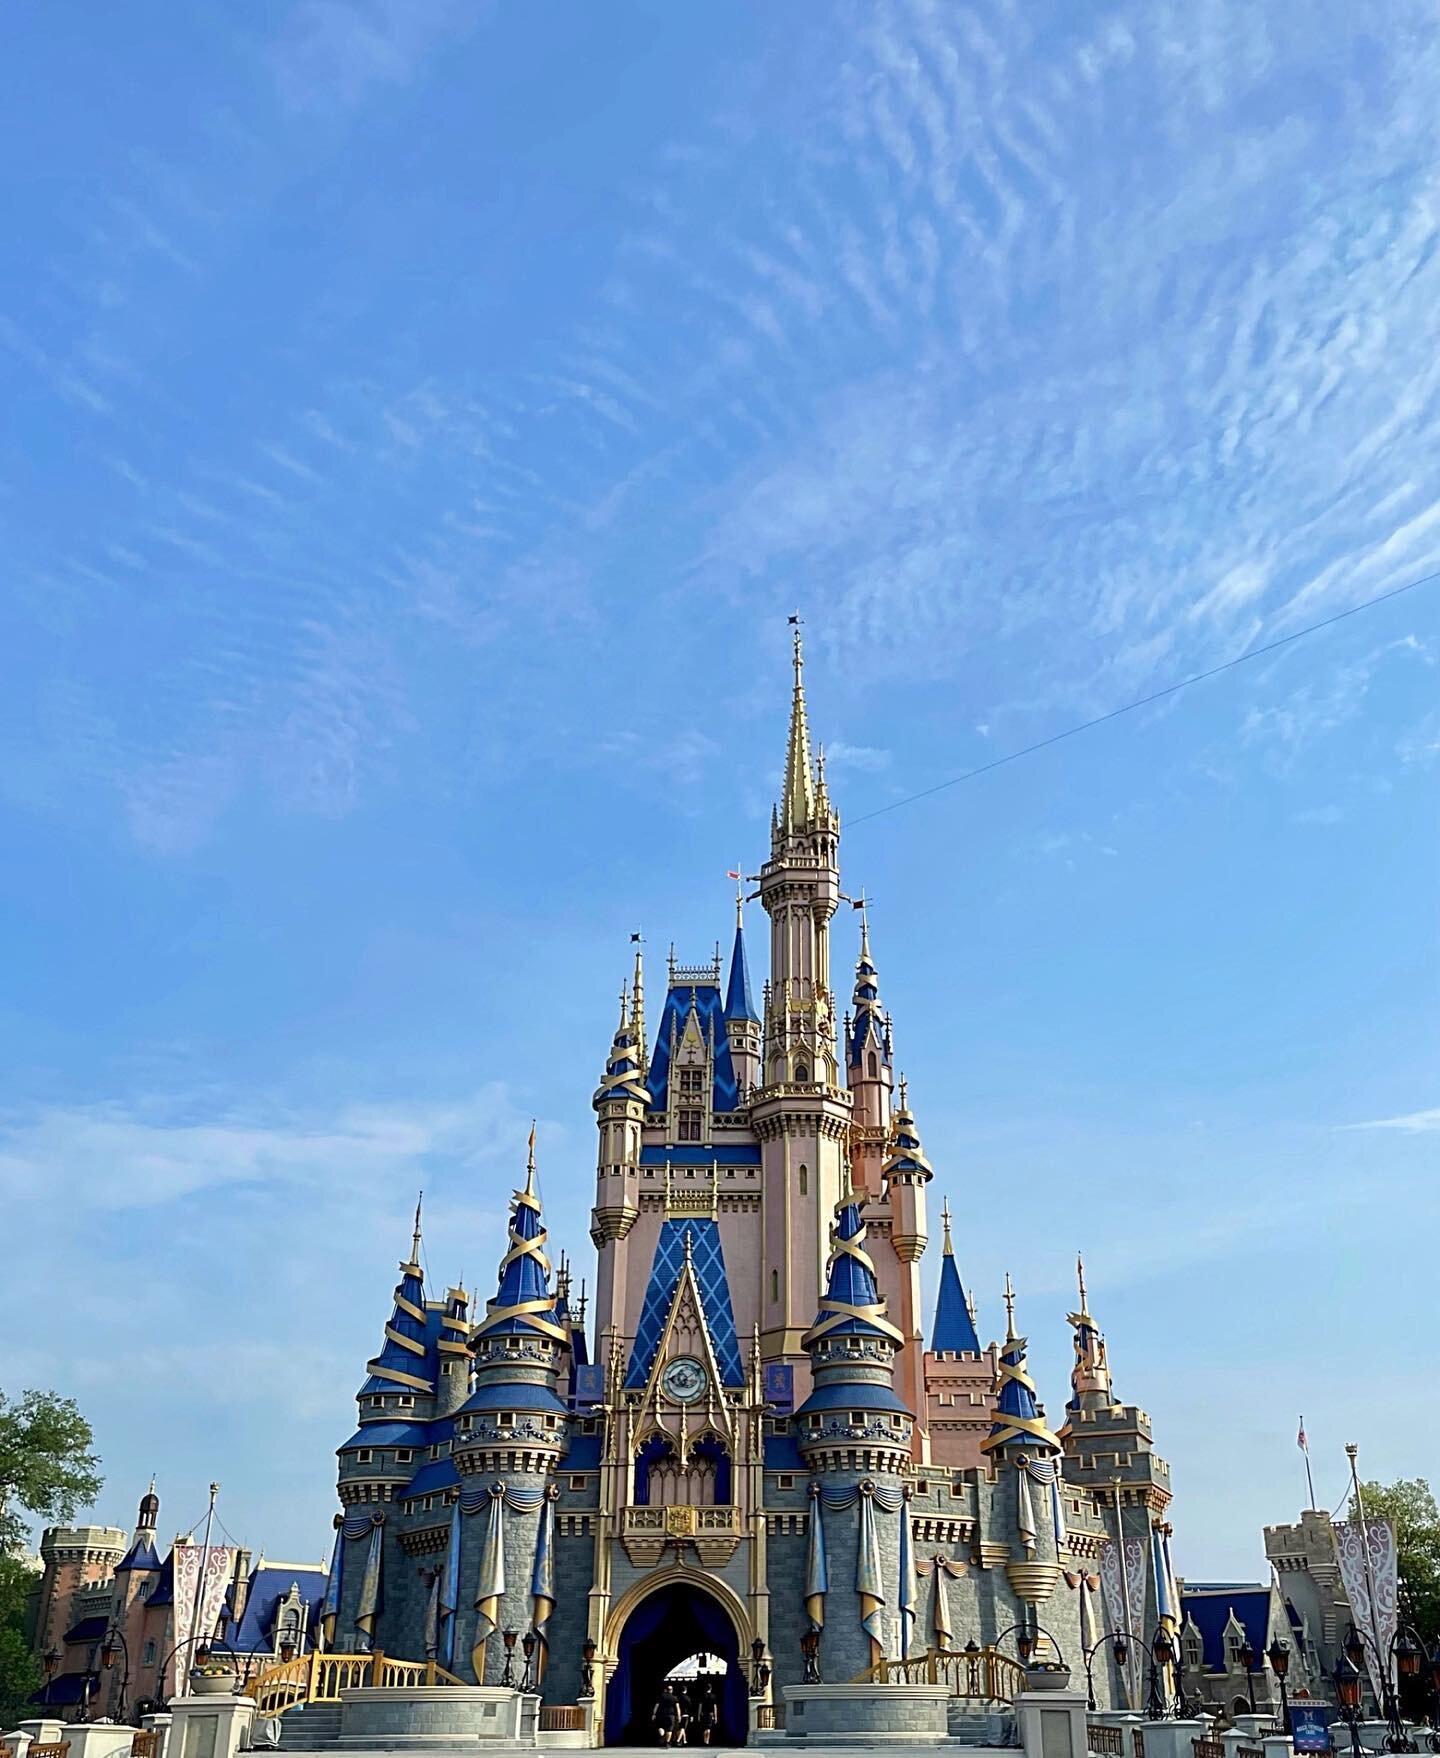 Planning a visit to the Sunshine State to enjoy the magic of @waltdisneyworld? ✨

But didn't realize how complicated it is? We totally get that.

Let @alwayselsewhere_ help demystify the Disney planning process so you don't have to research which par